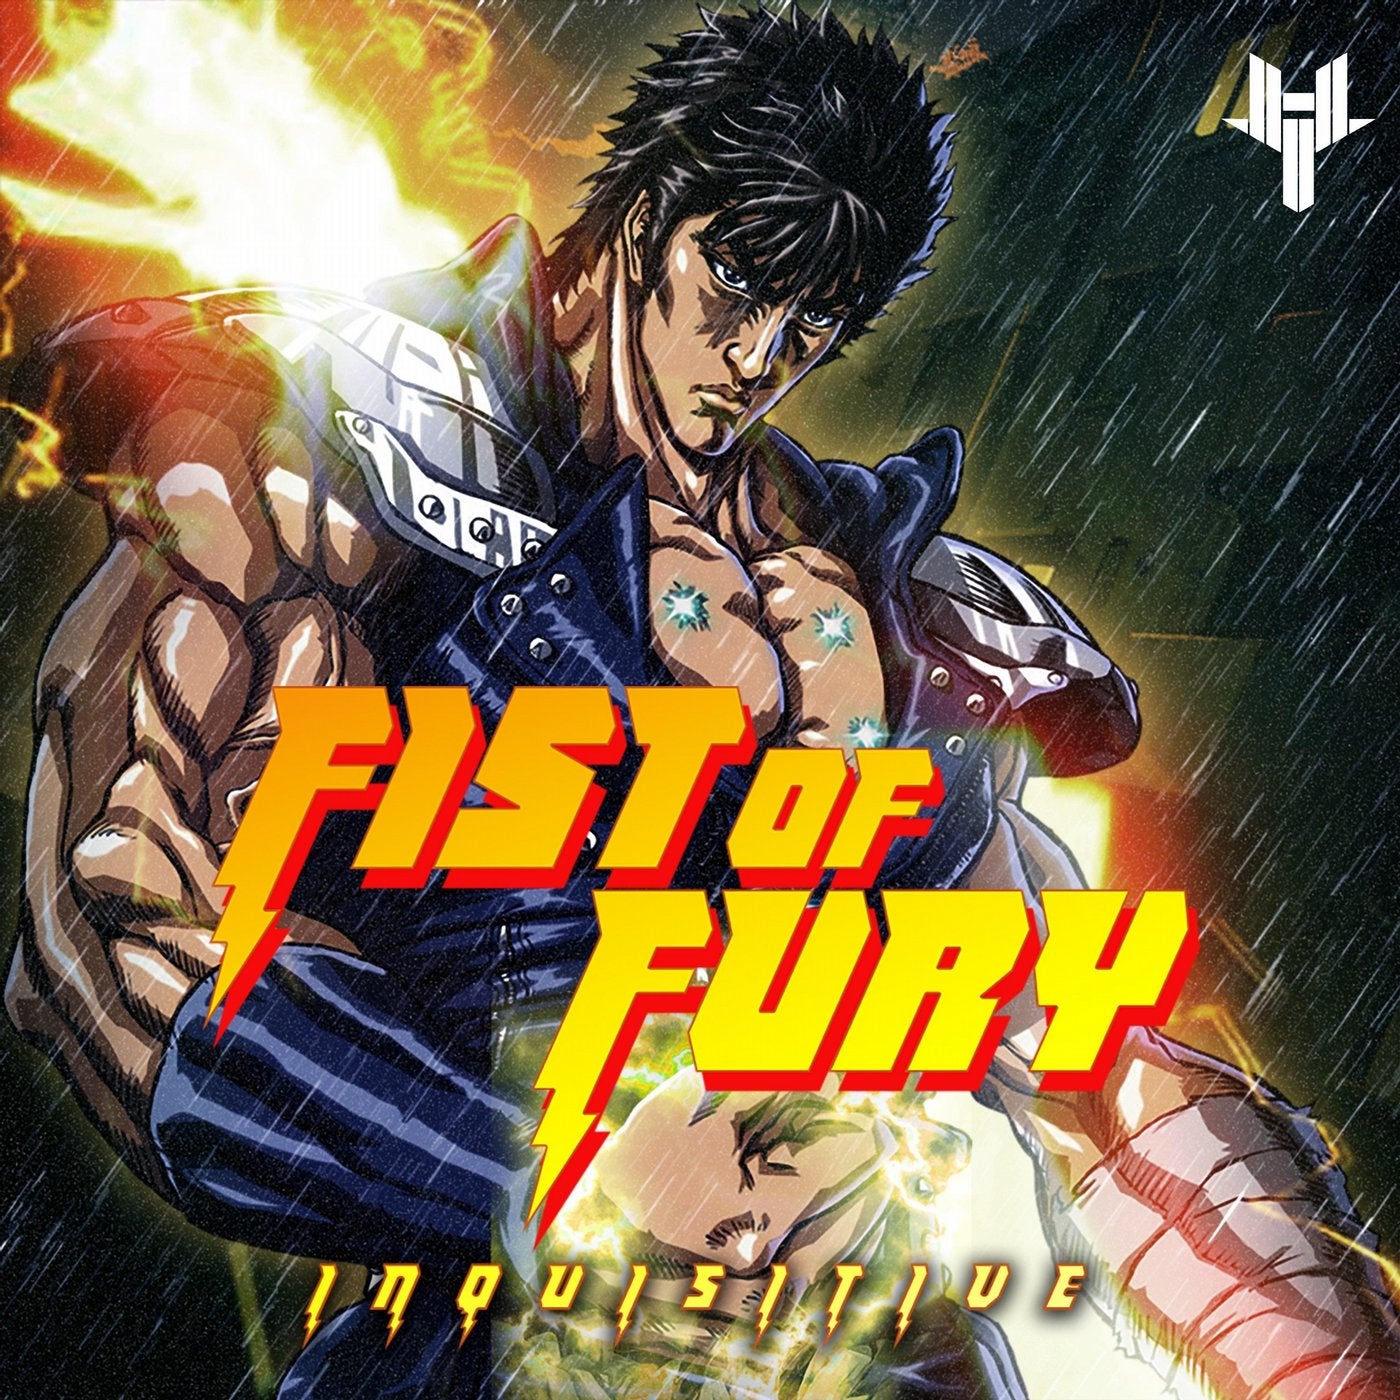 Fist Of Fury from SoundCloud Direct on Beatport